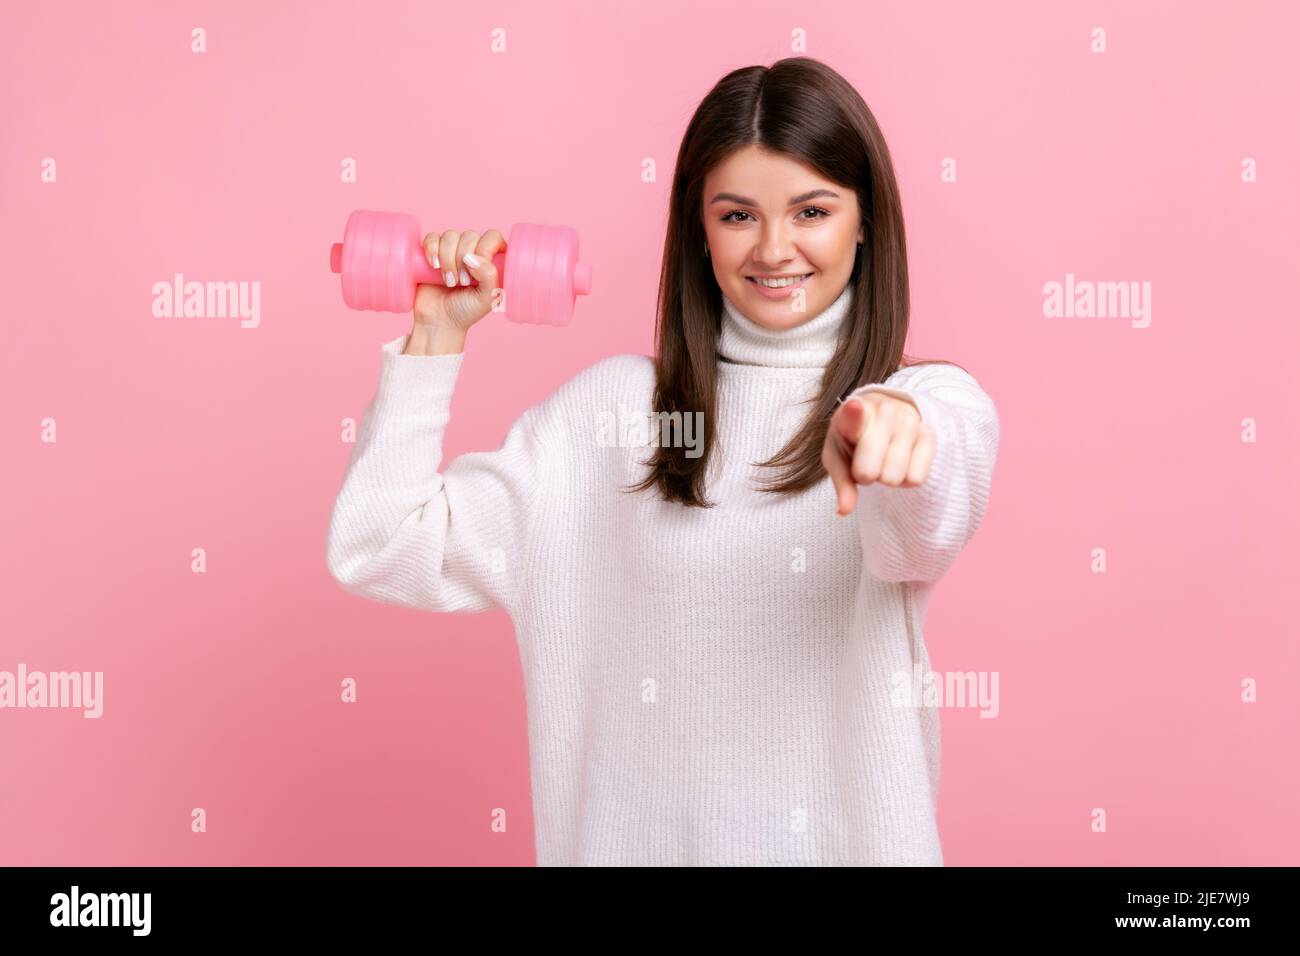 Smiling female holding rose dumbbells and pointing finger to camera, calls on to go in for sport, wearing white casual style sweater. Indoor studio shot isolated on pink background. Stock Photo